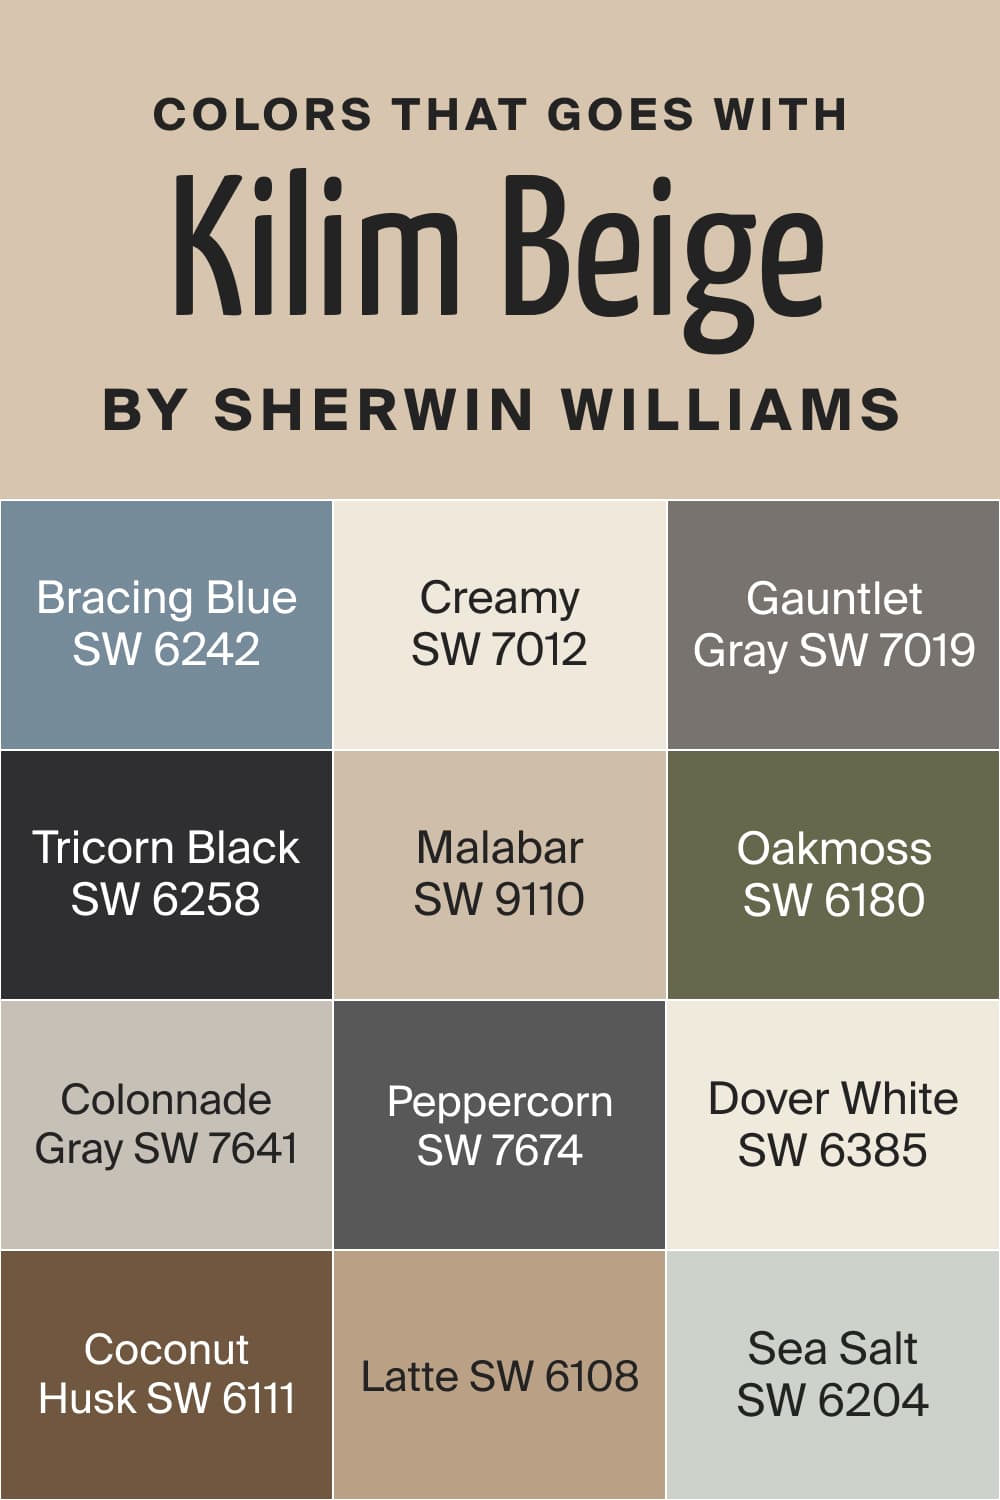 Colors that goes with Kilim Beige SW 6106 by Sherwin Williams